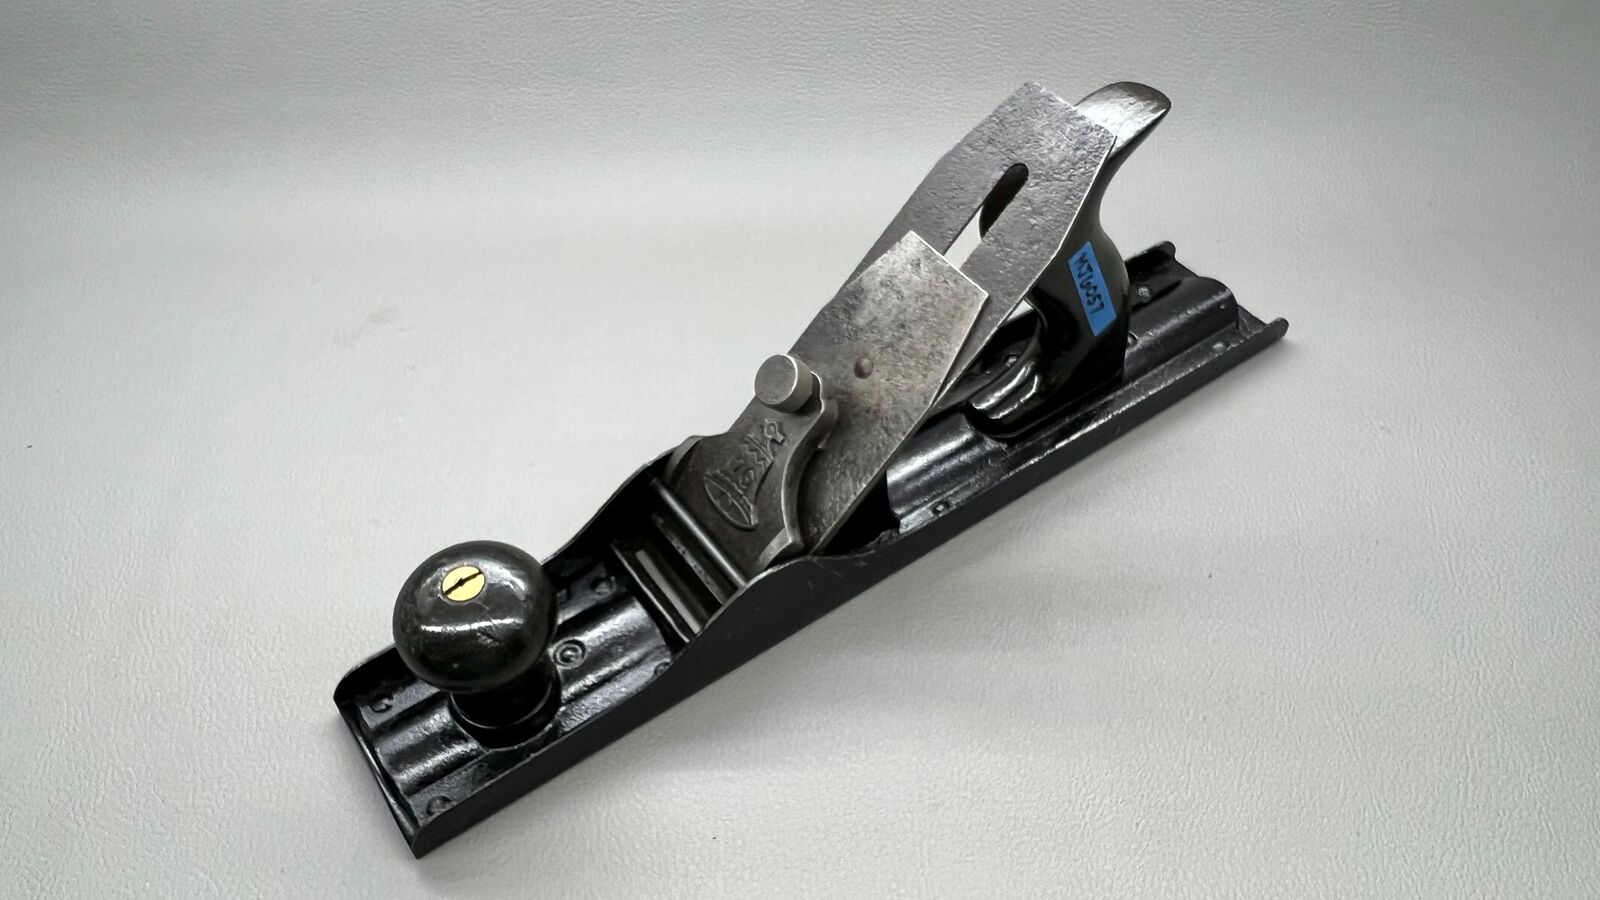 Stanley No 105 Liberty Bell Bench Plane Rule and Level Cutter Has Pitting but will have minimal effect on performance